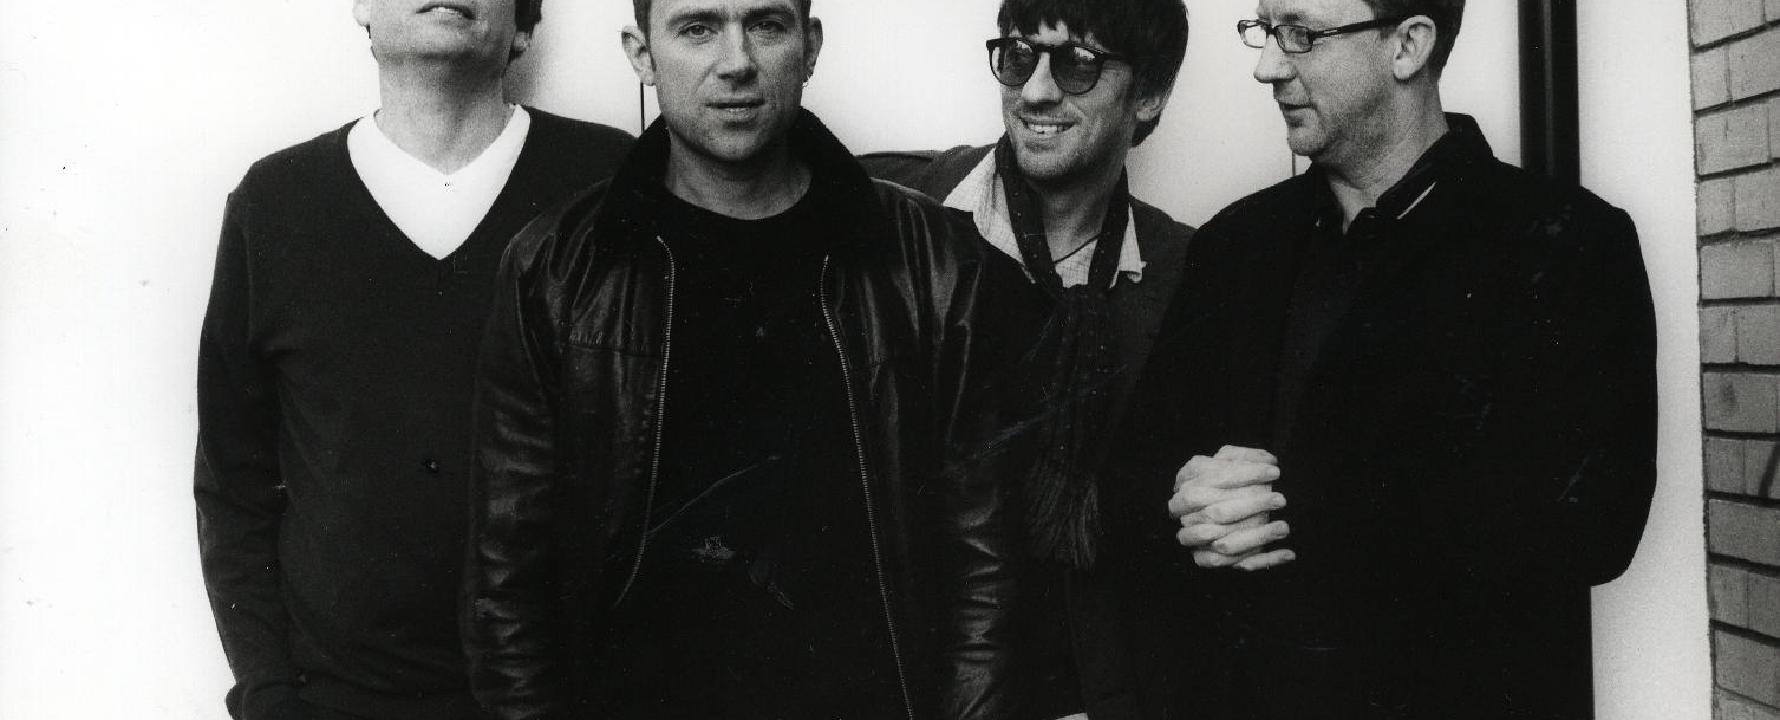 Promotional photograph of Blur.